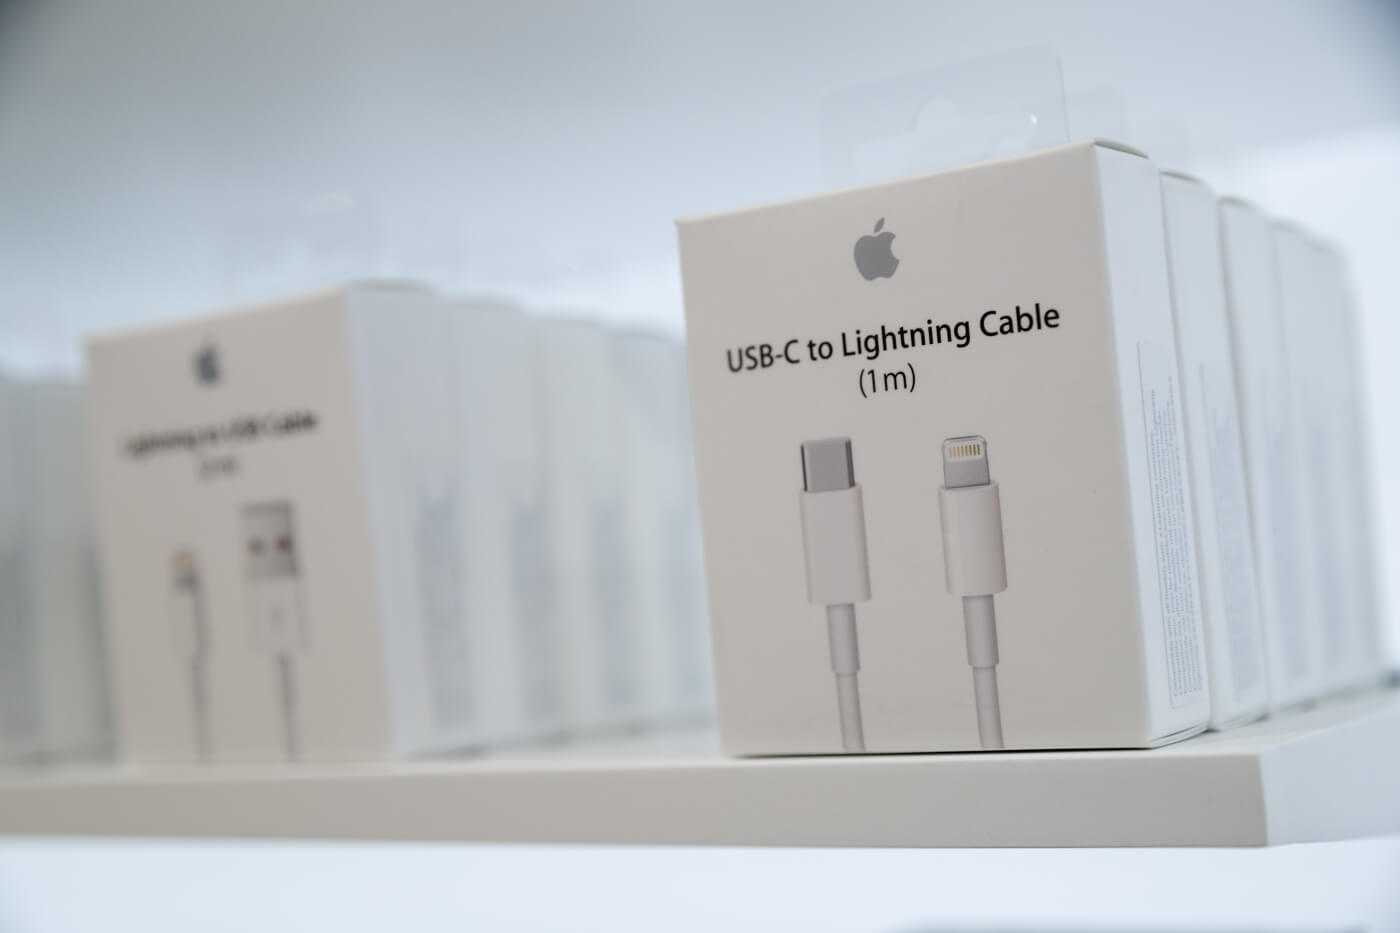 Apple argues against EU calls for universal mobile charger, says it would stifle innovation